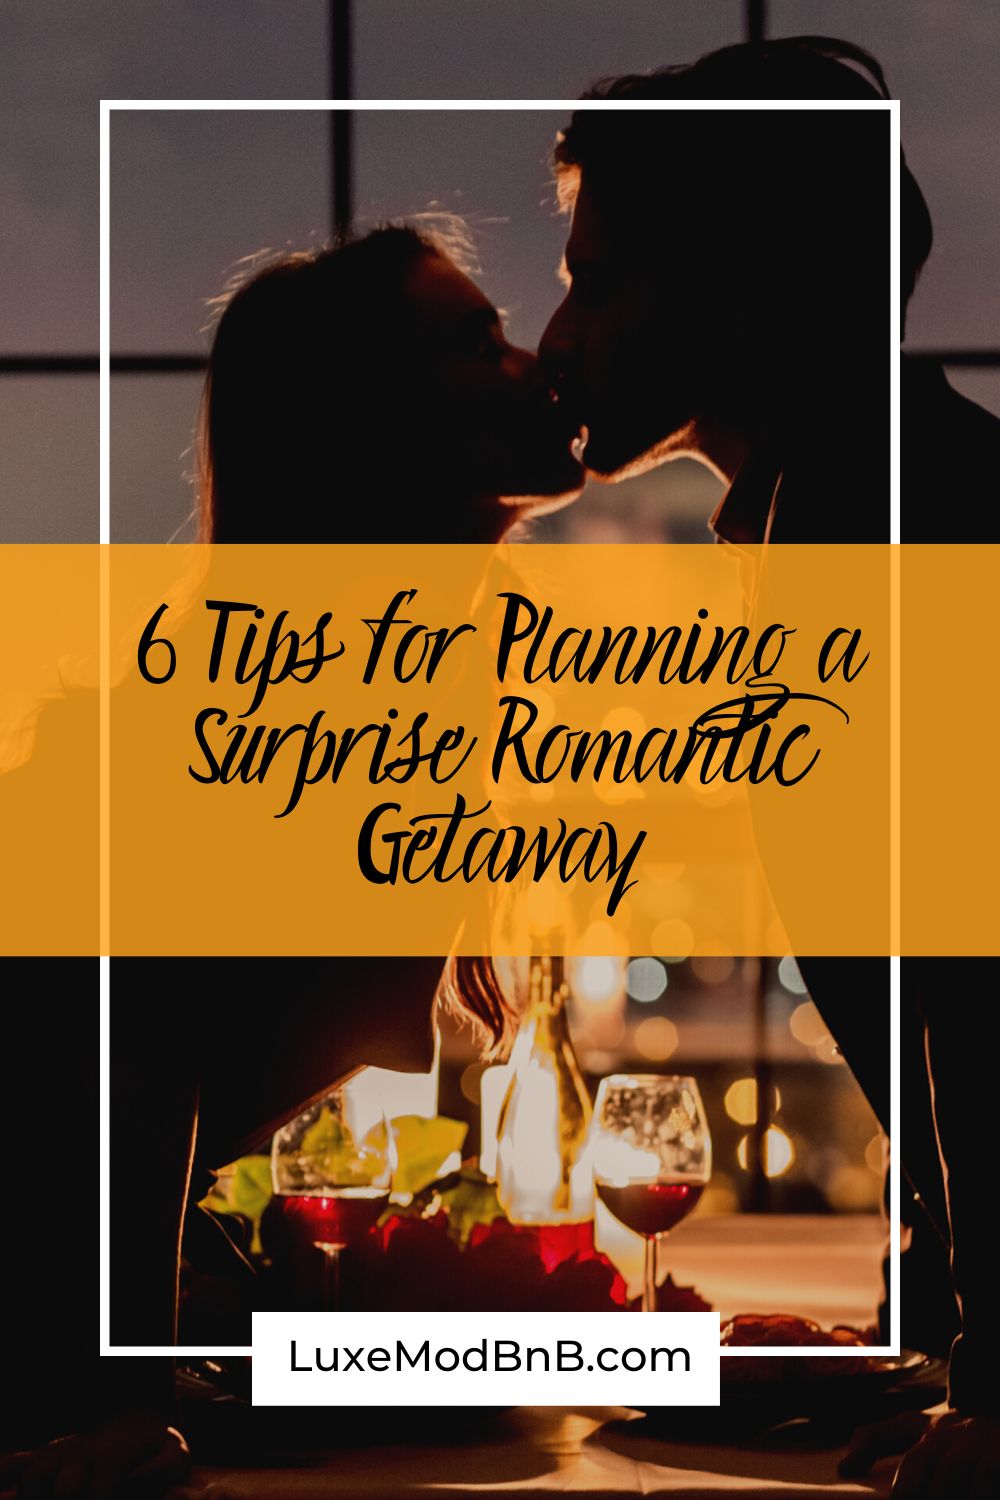 6 Tips for Planning a Surprise Romantic Getaway